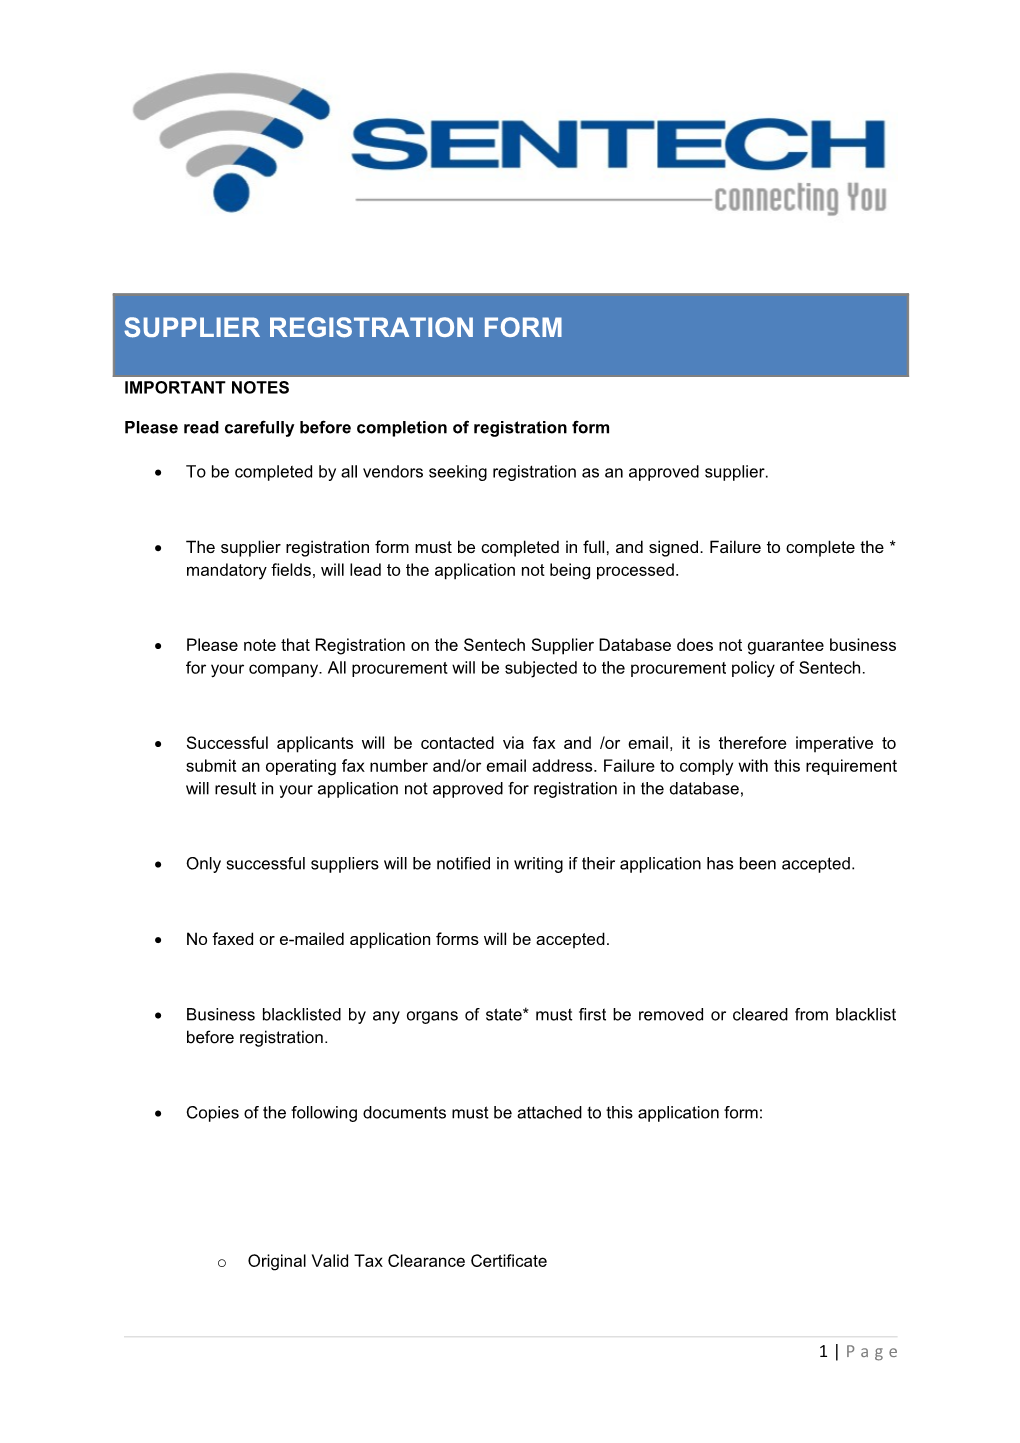 Please Read Carefully Before Completion of Registration Form